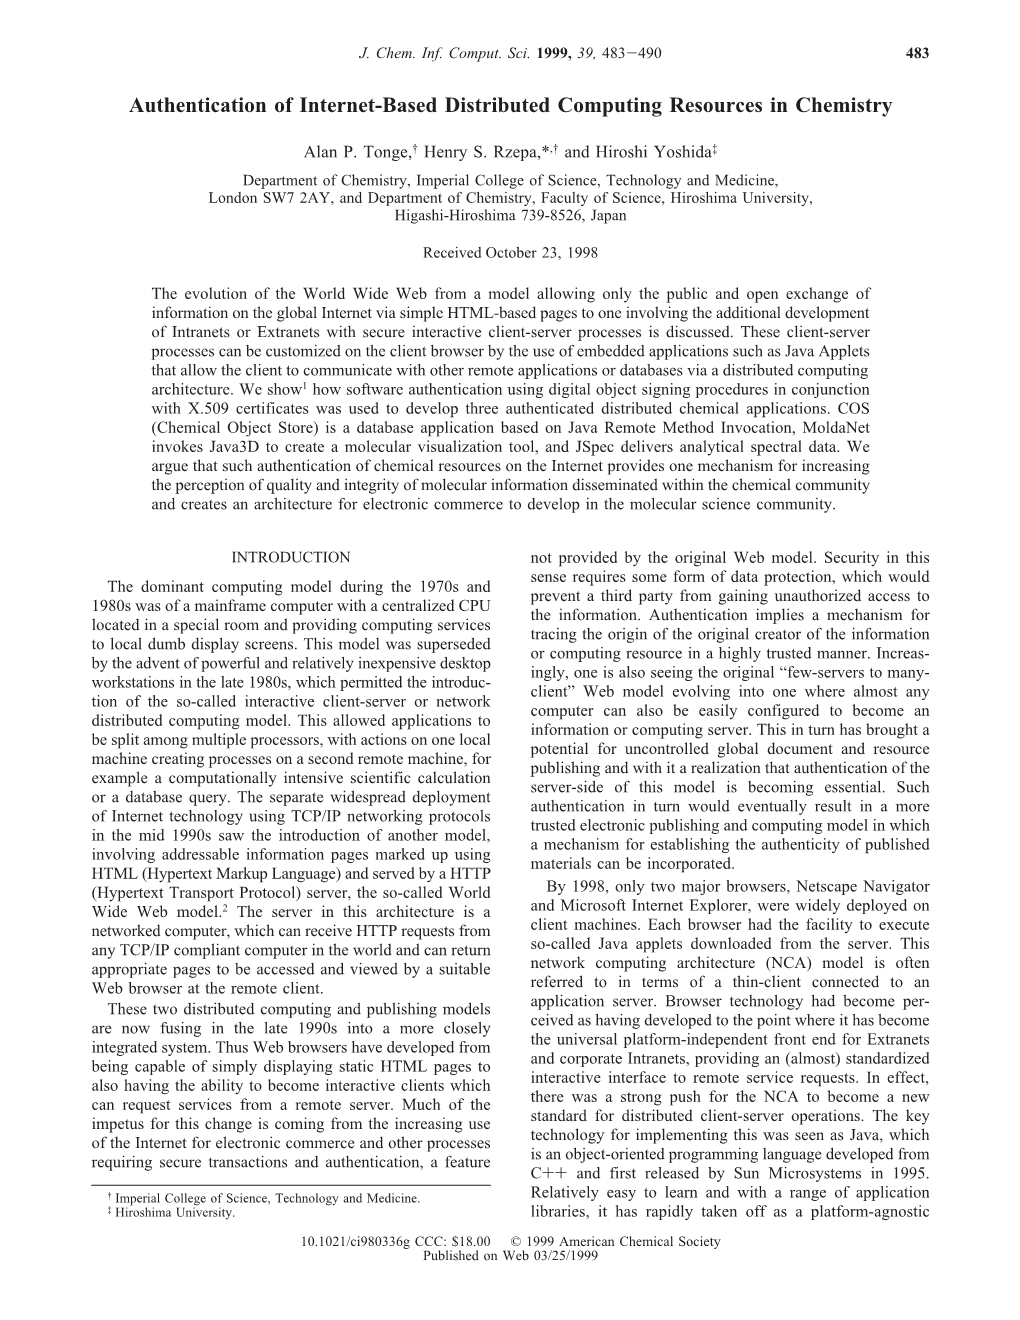 Authentication of Internet-Based Distributed Computing Resources in Chemistry